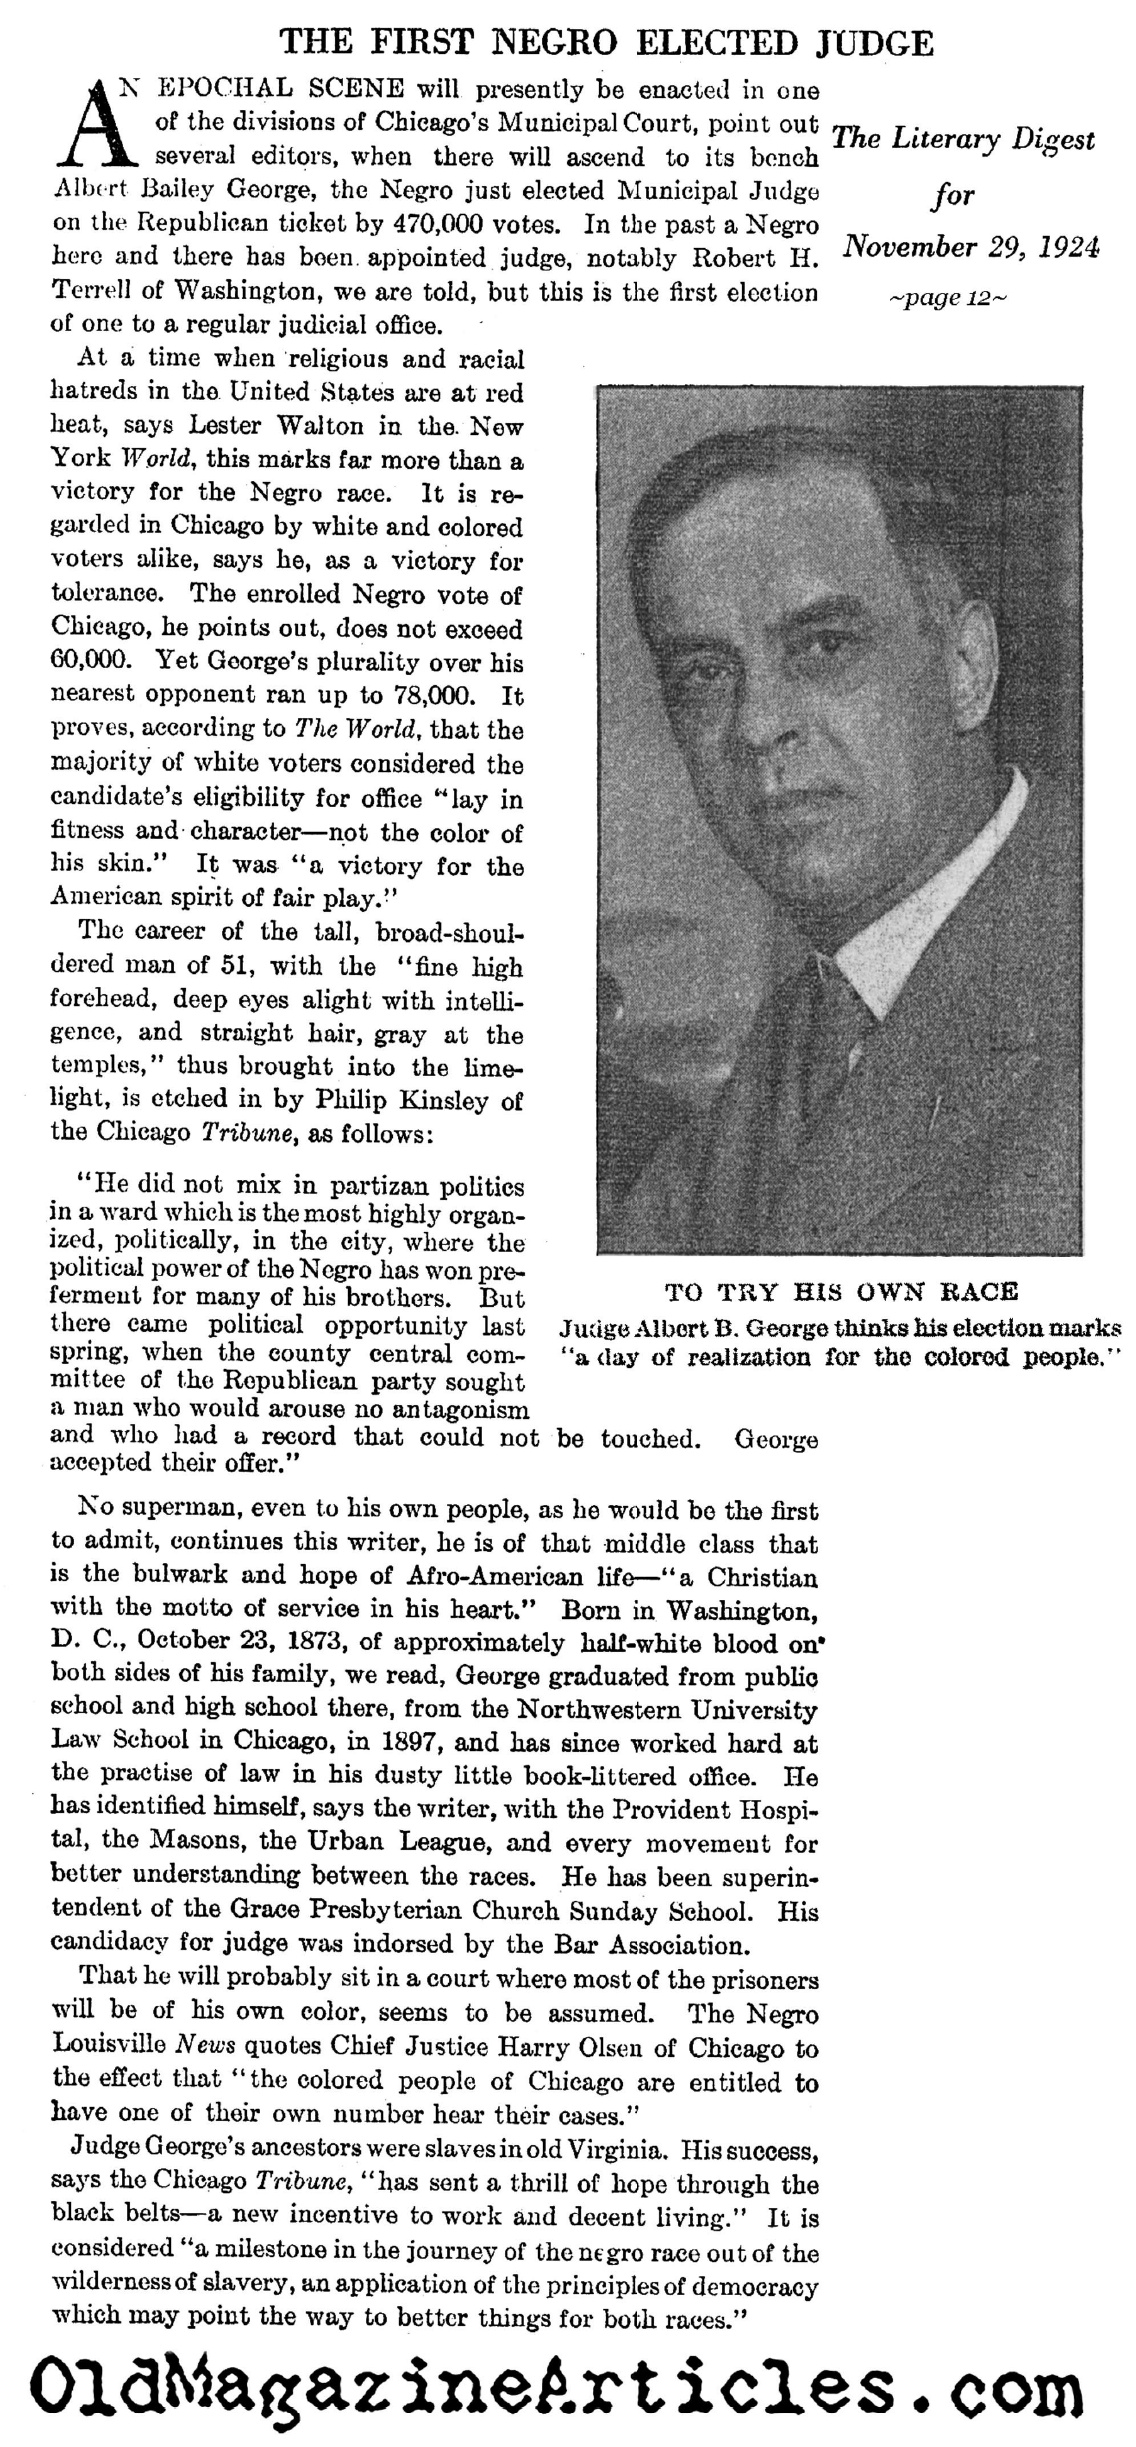 The First Elected African-American Judge (Literary Digest, 1924)